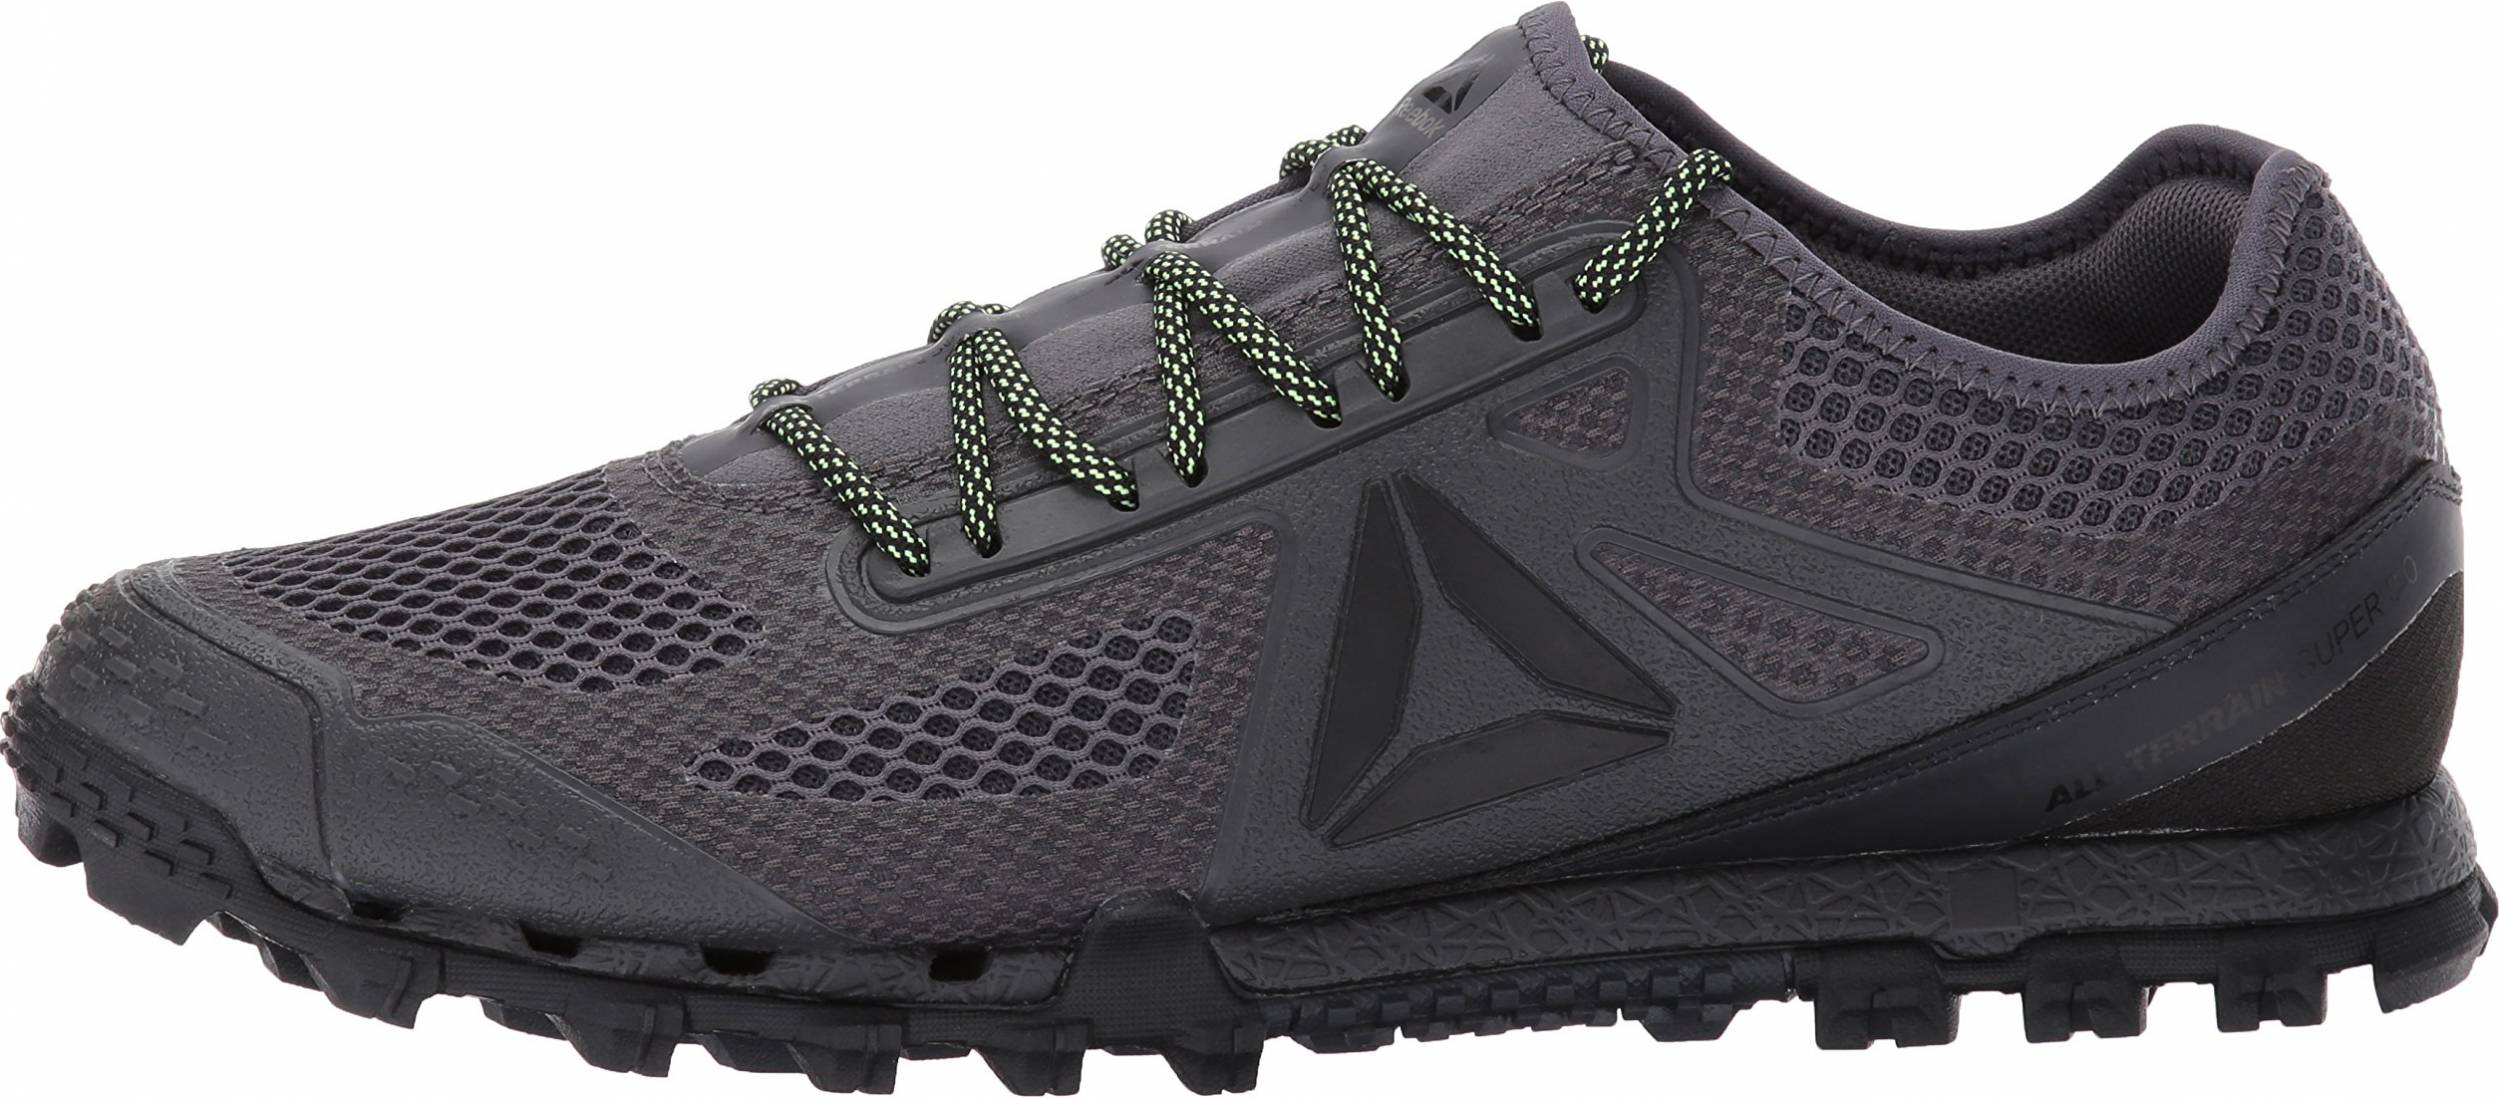 Only $102 + Review of Reebok All Terrain Super 3.0 | RunRepeat